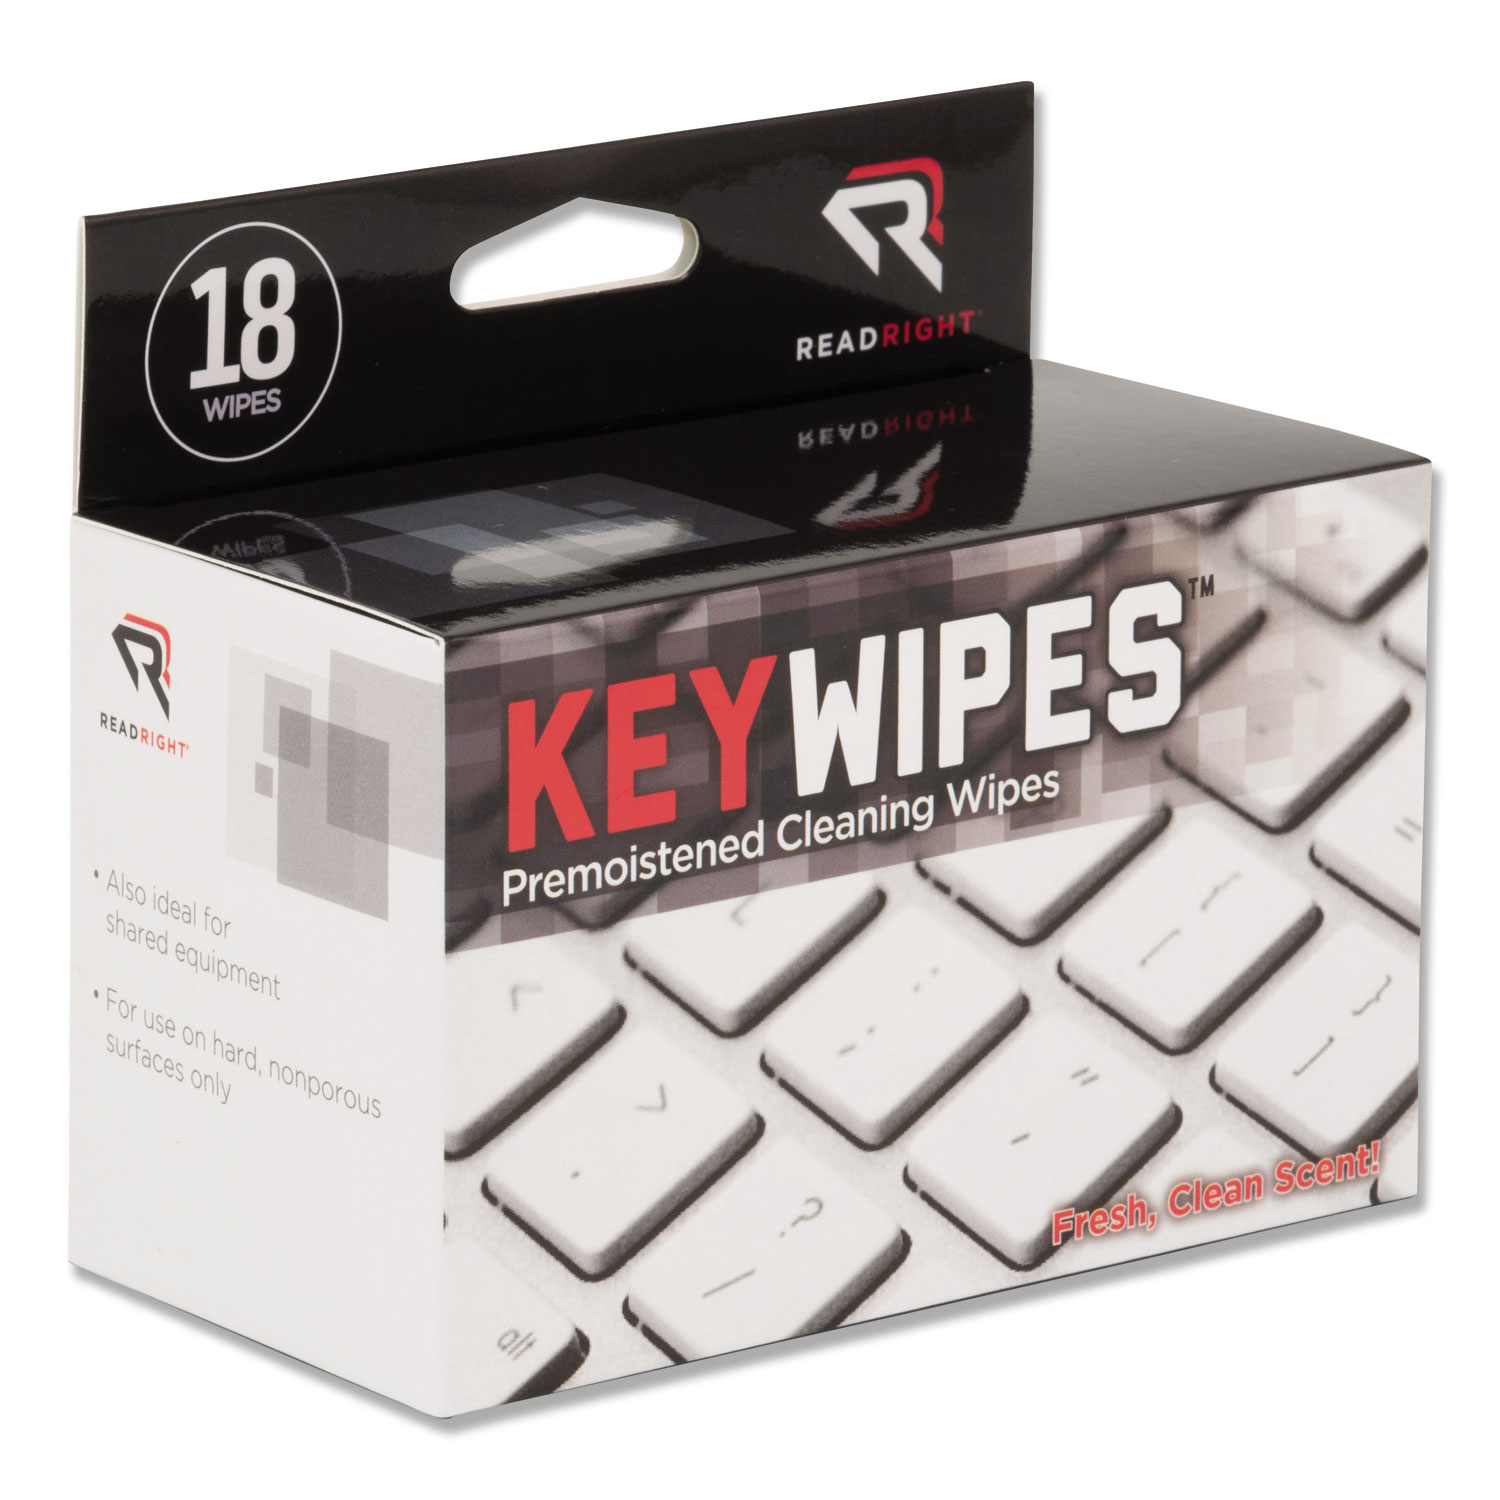  Read Right RR1233 KeyWipes Keyboard and Hand Cleaner Wet Wipes, 5 x 6.88, 18/Box (REARR1233) 